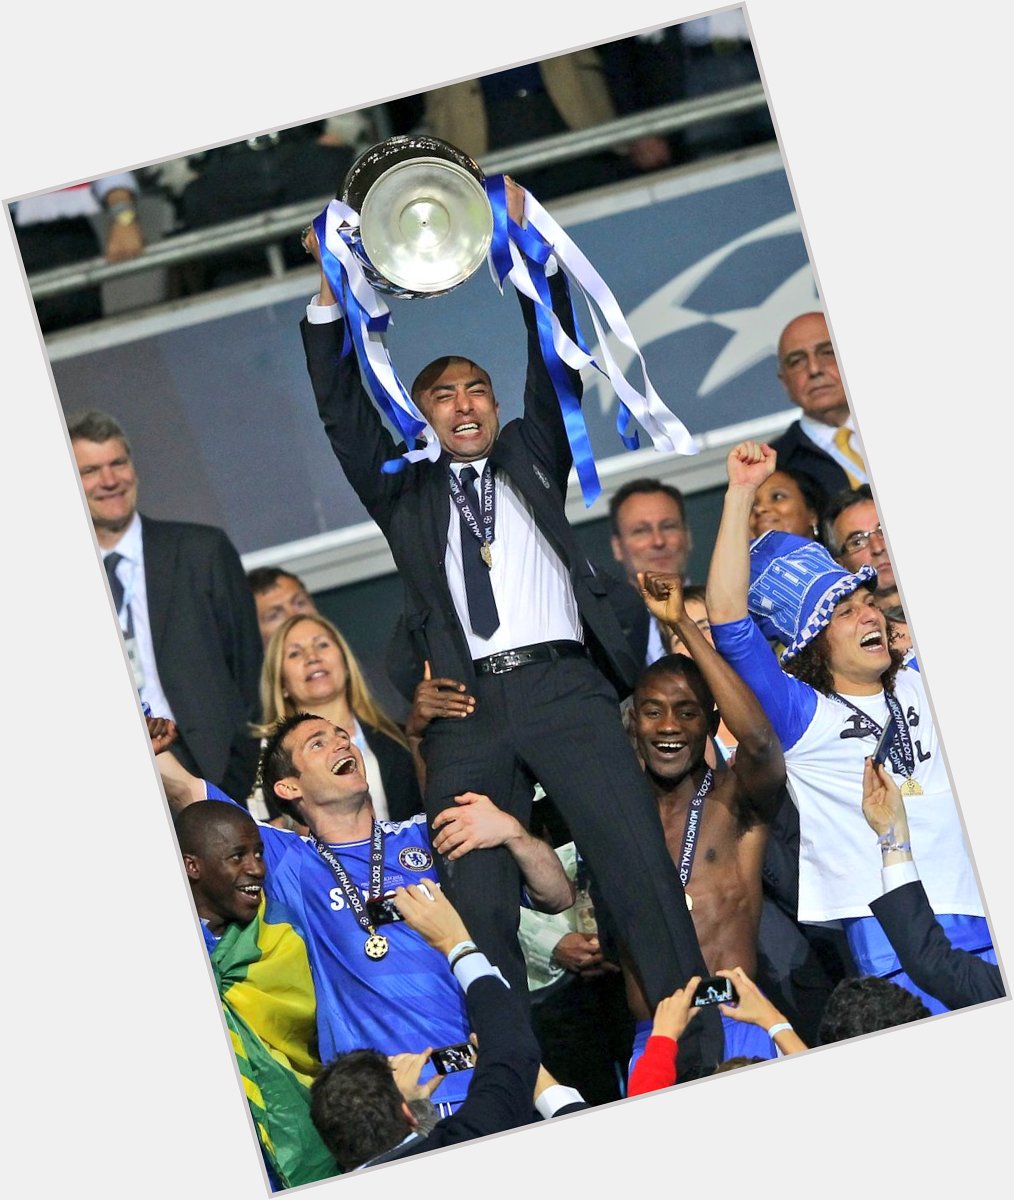 Happy birthday to Roberto Di Matteo, the man that won us our first ever Champions League trophy. 